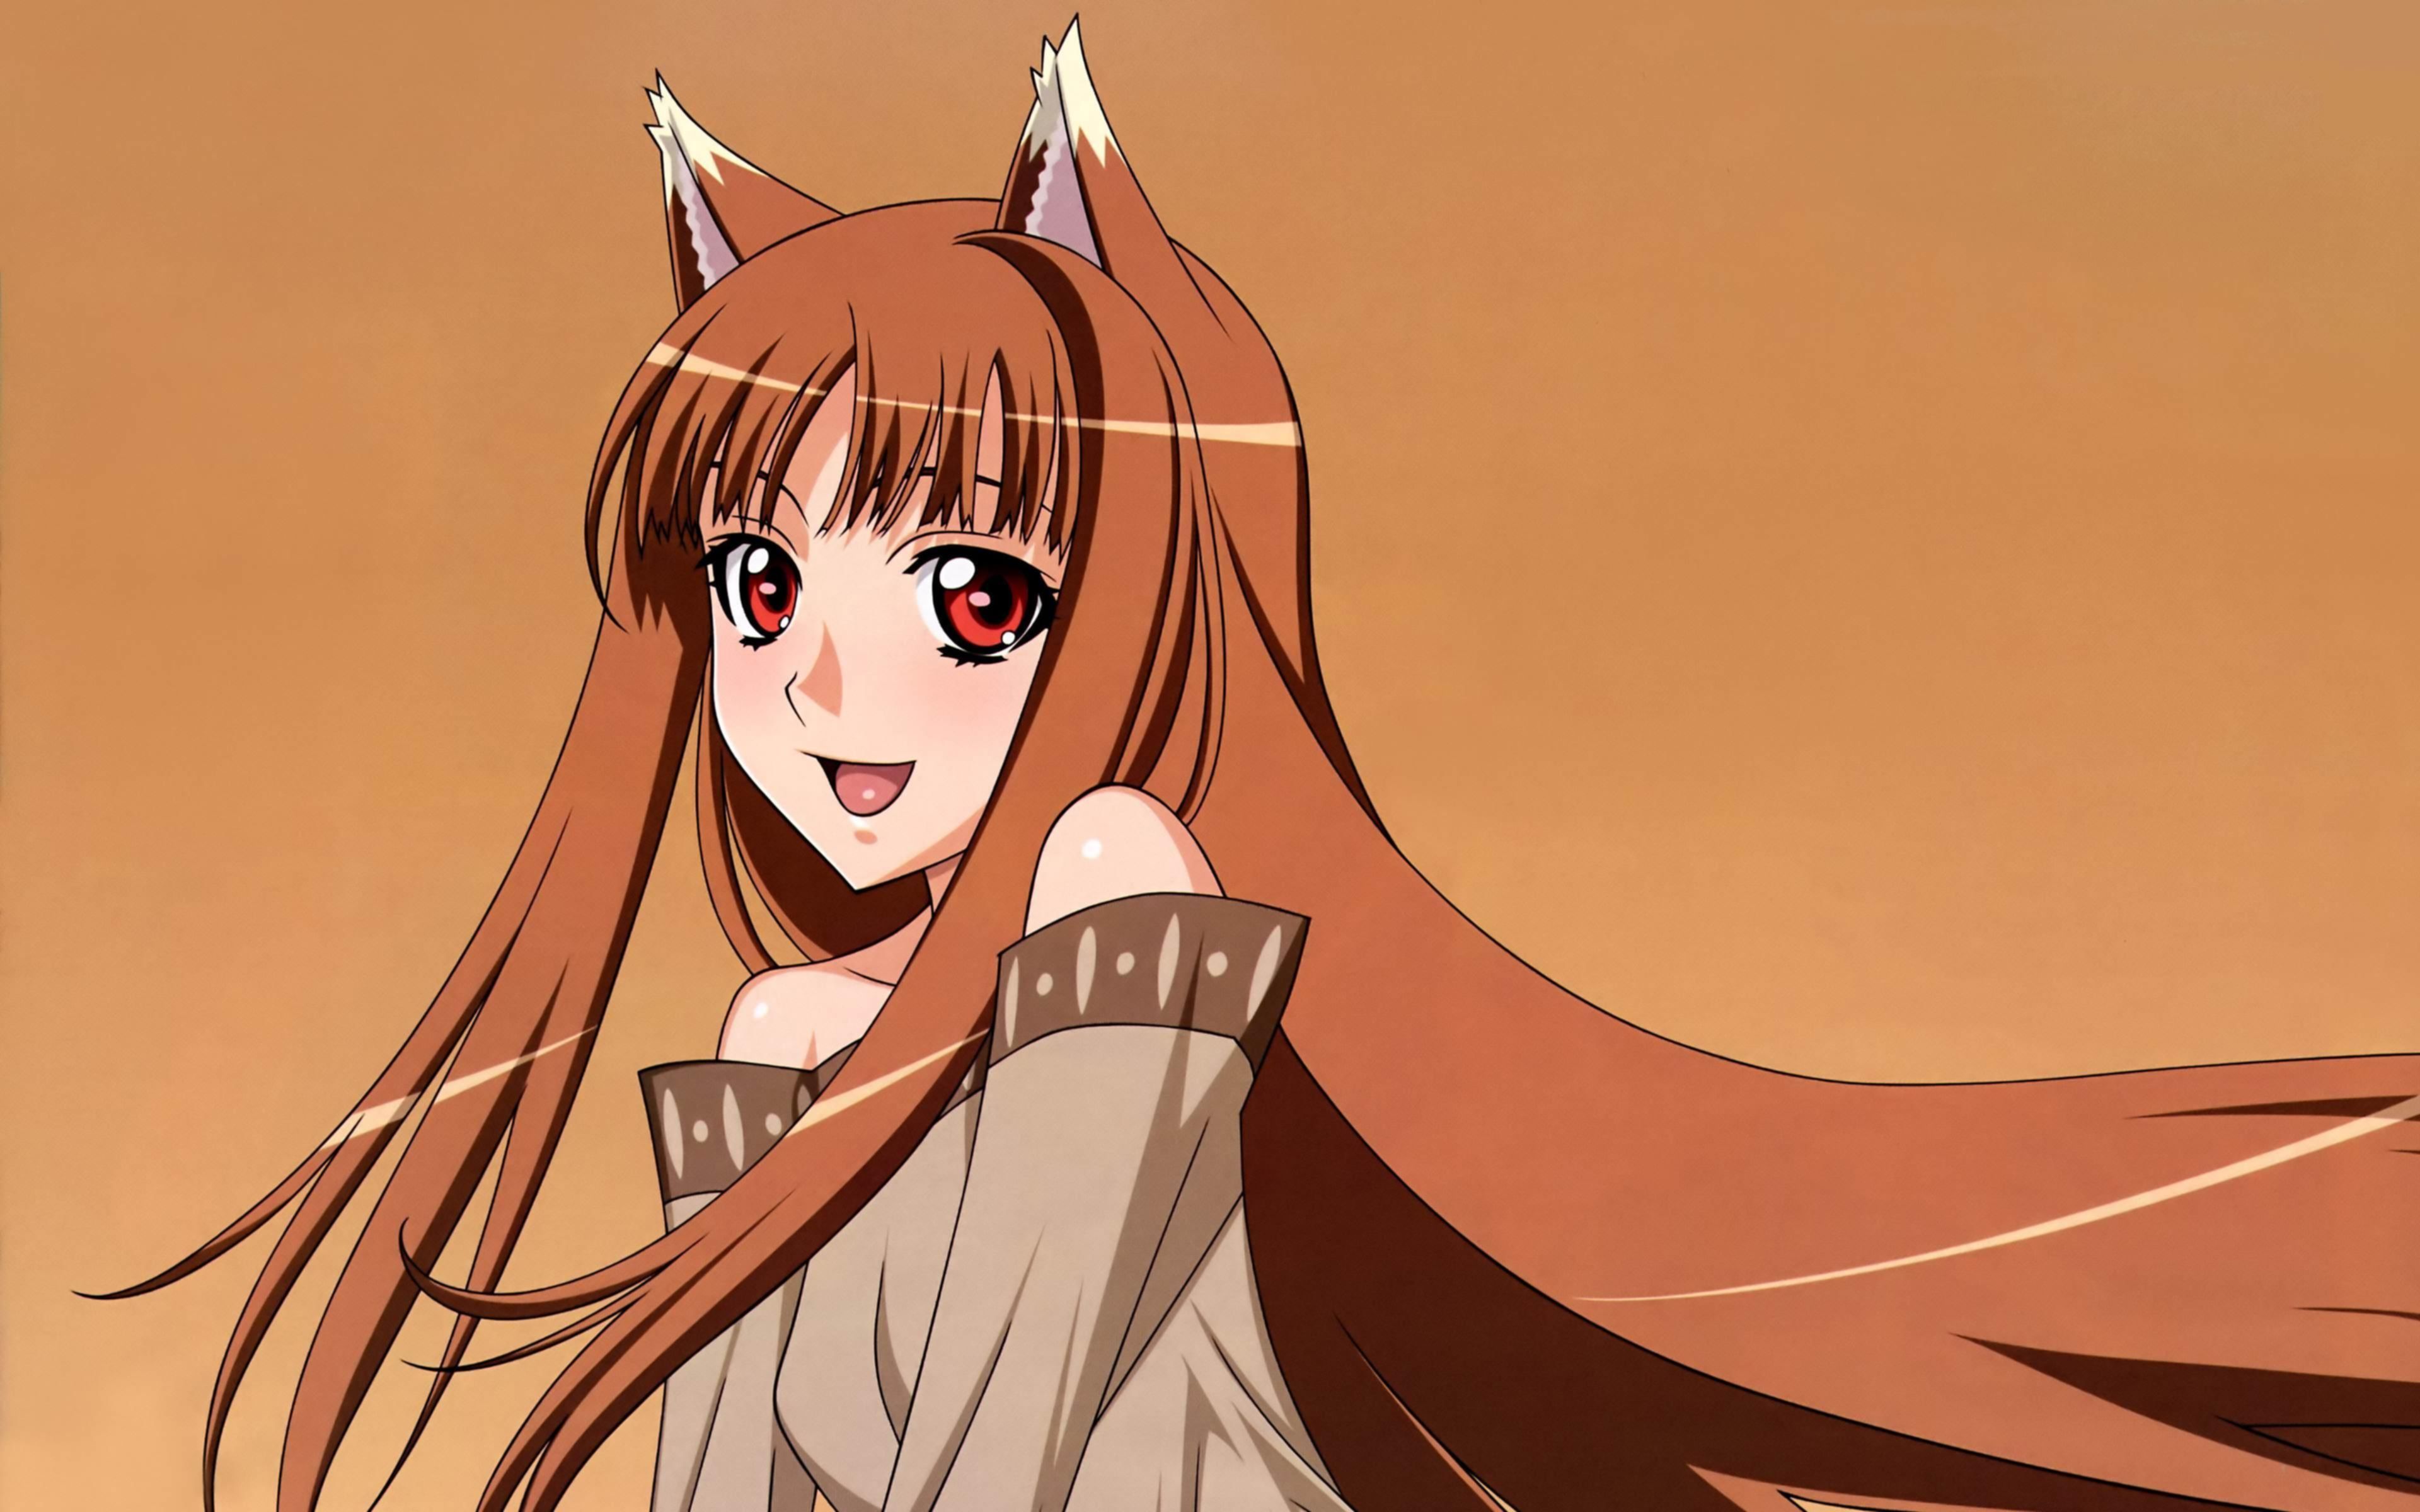 Best wallpaper of wolf and spice horo, wallpaper of spice and wolf